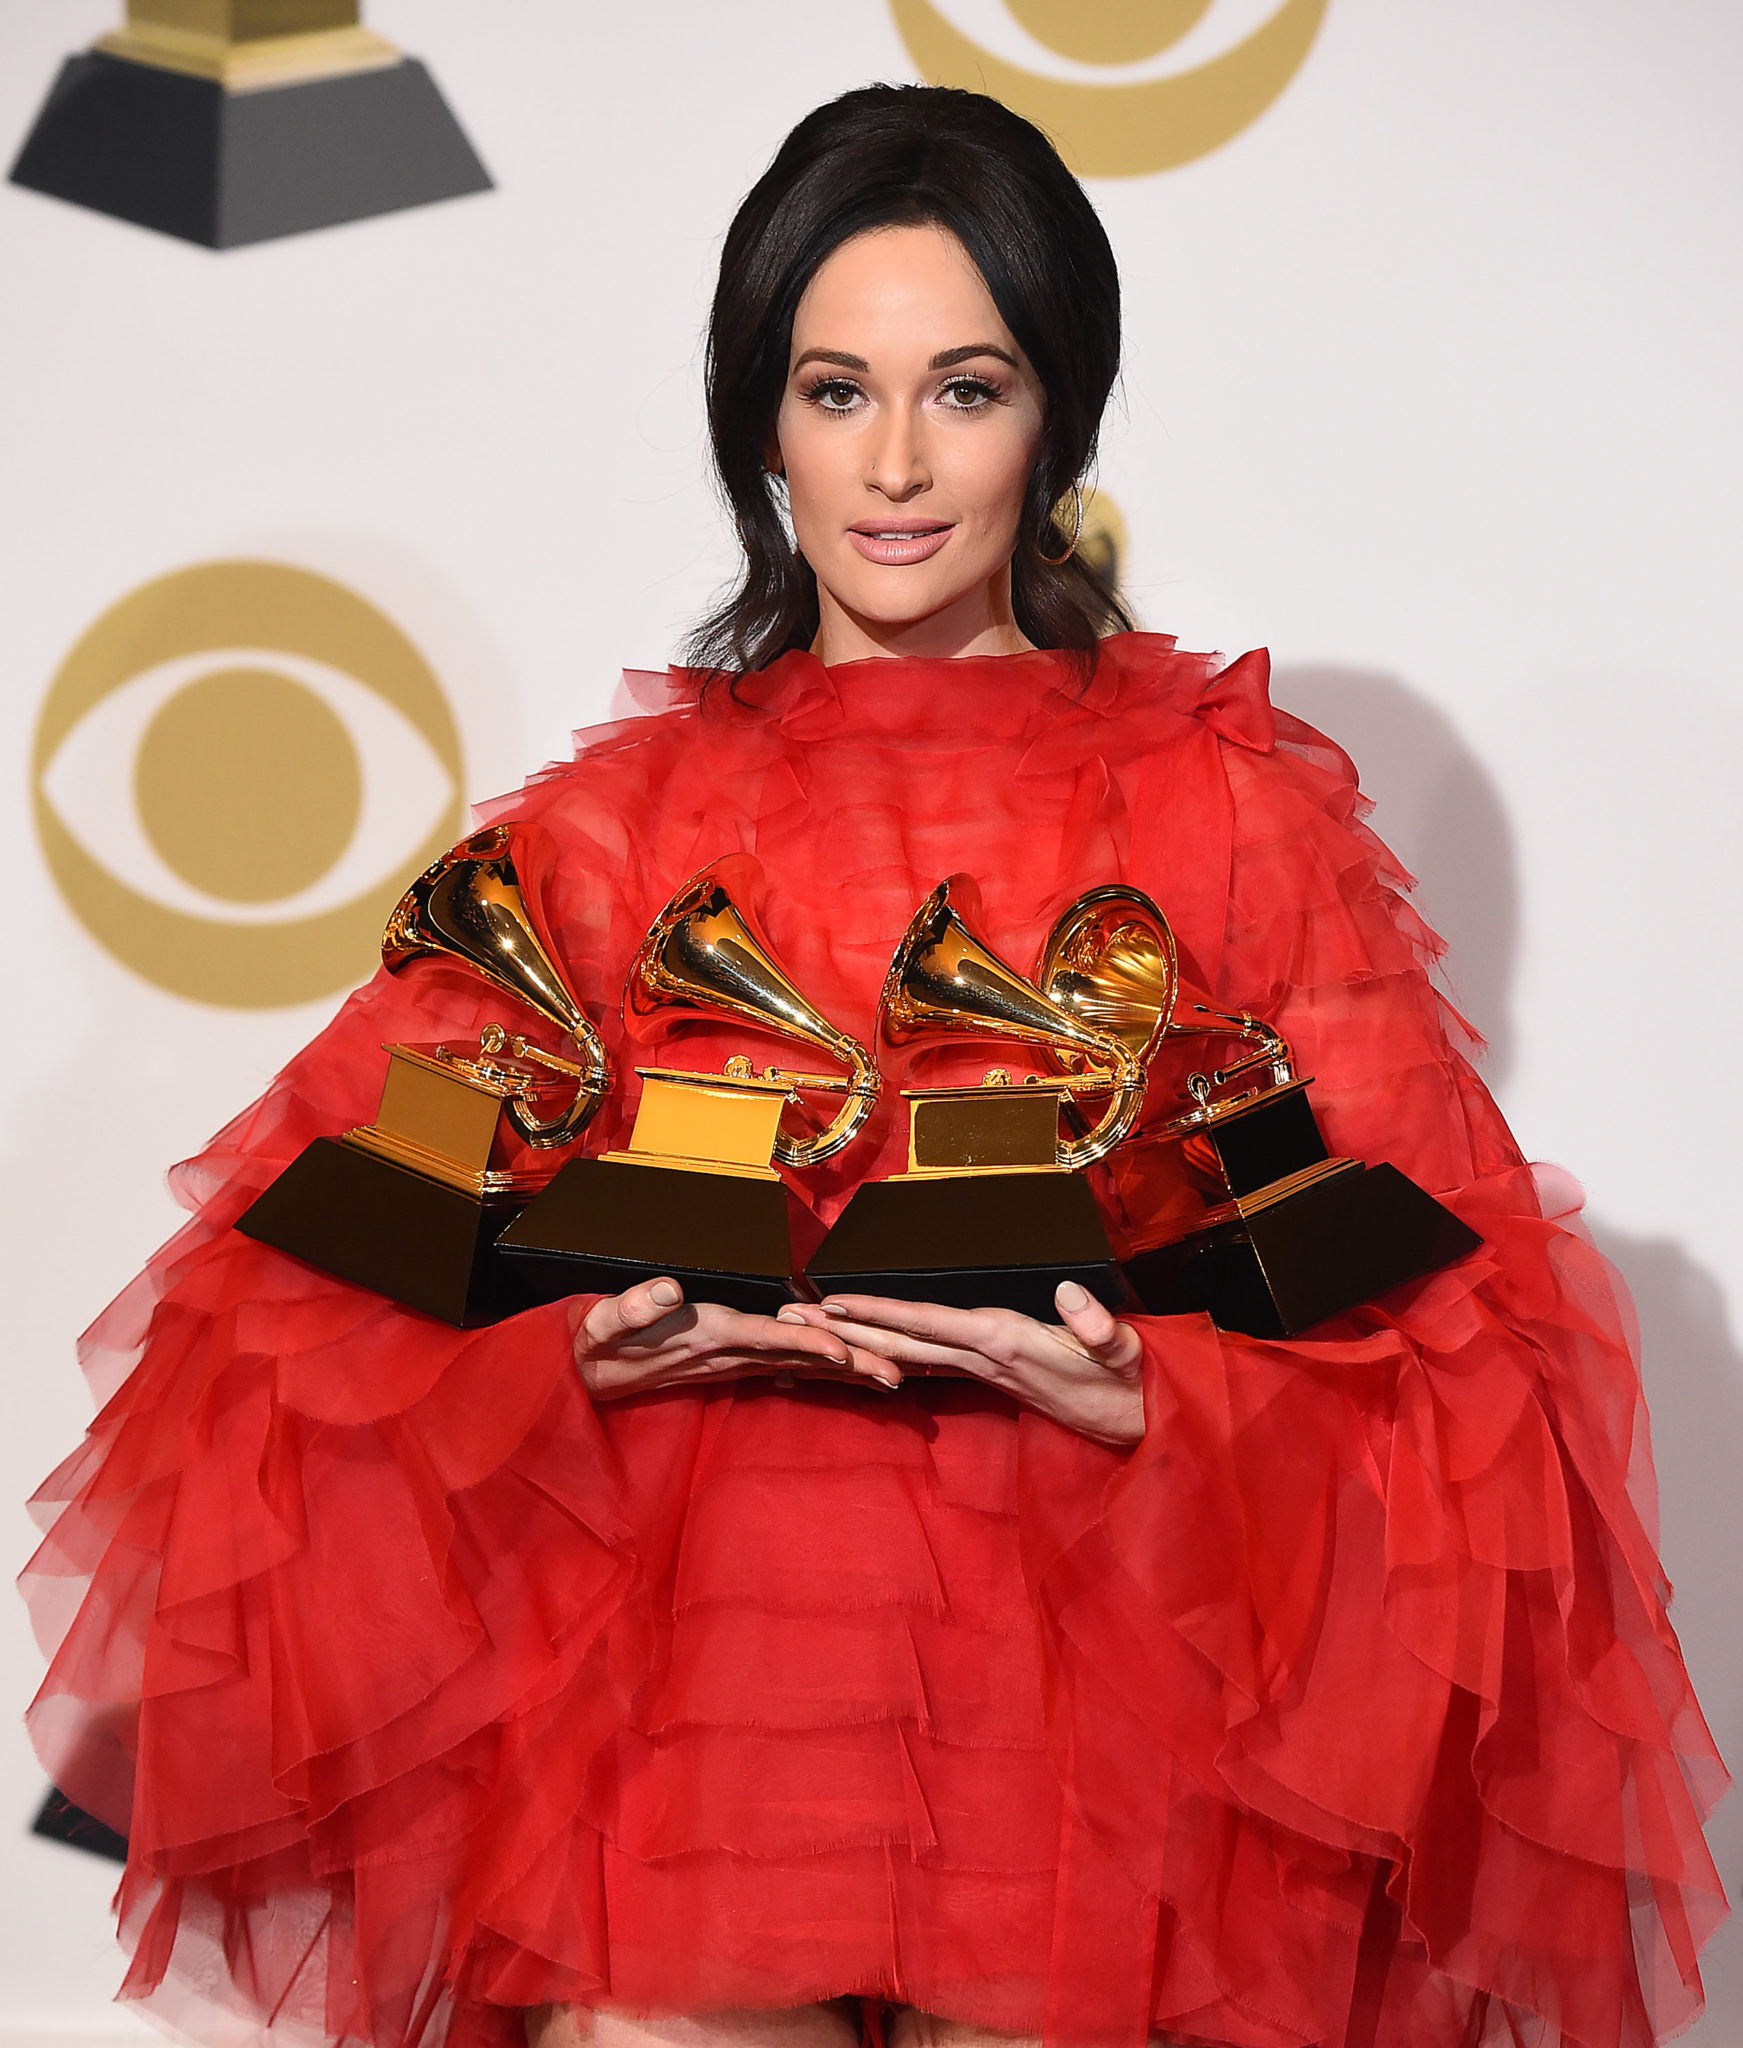 Grammys 2019: The Complete List Of Winners In All Categories | SPIN1038